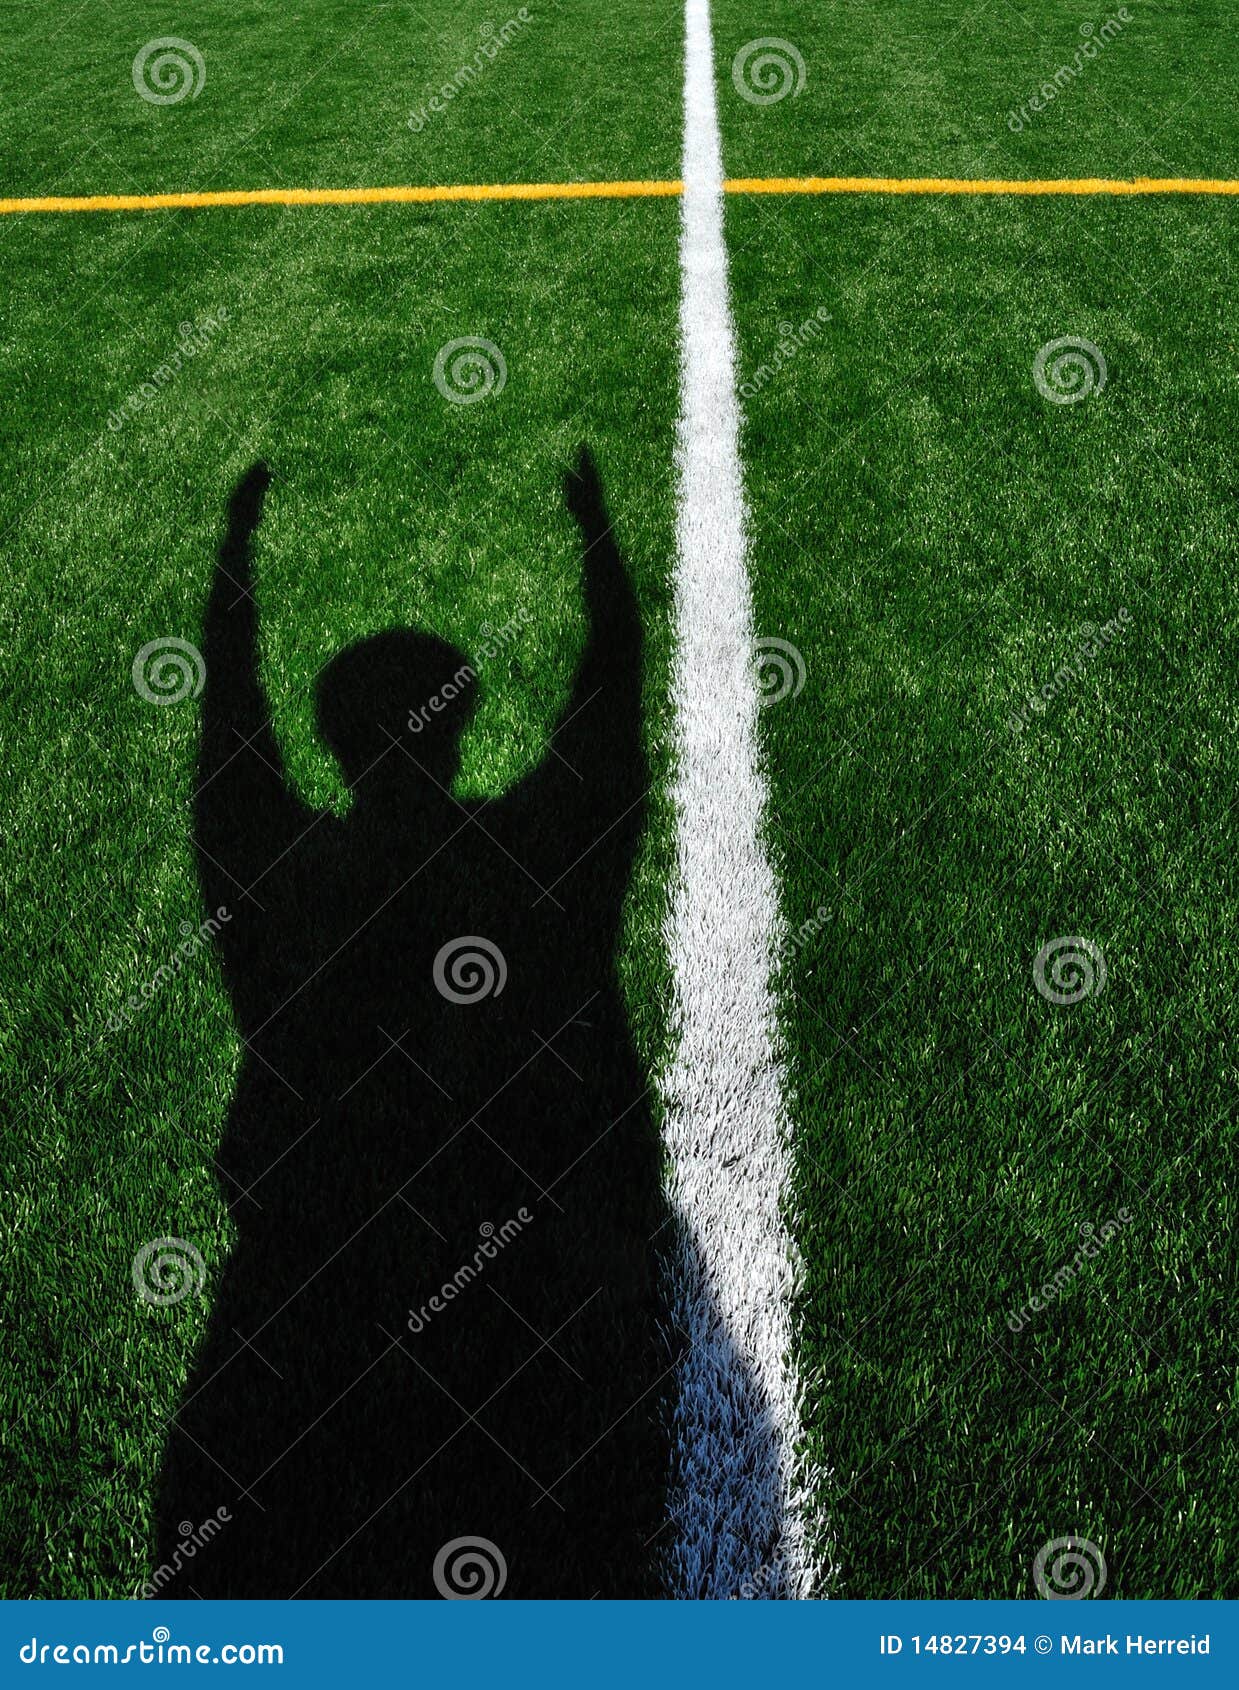 american football referee signaling touchdown